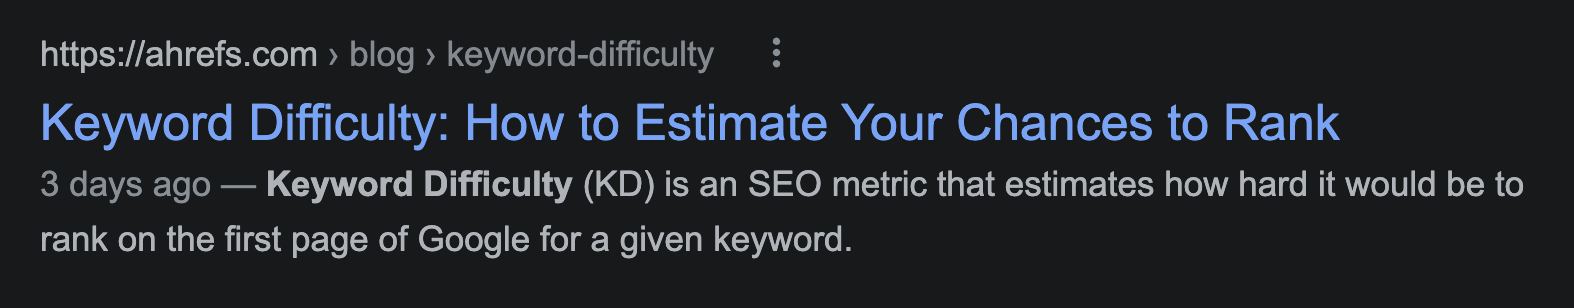 Except of a Google SERP showing title "Keyword Difficulty: How to Estimate Your Chances to Rank"